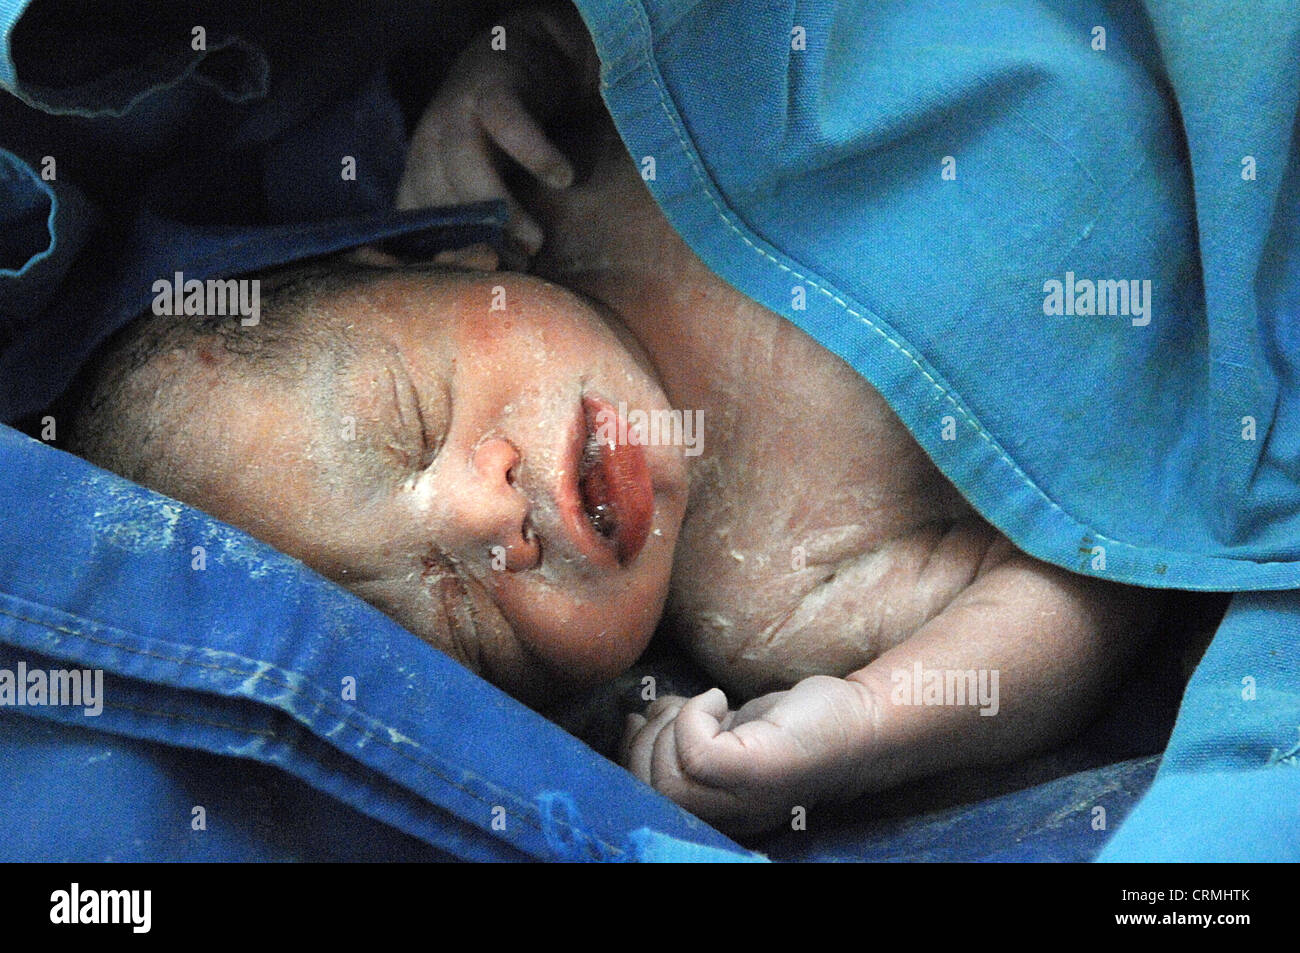 Close up of face of a new born baby soon after birth. Stock Photo